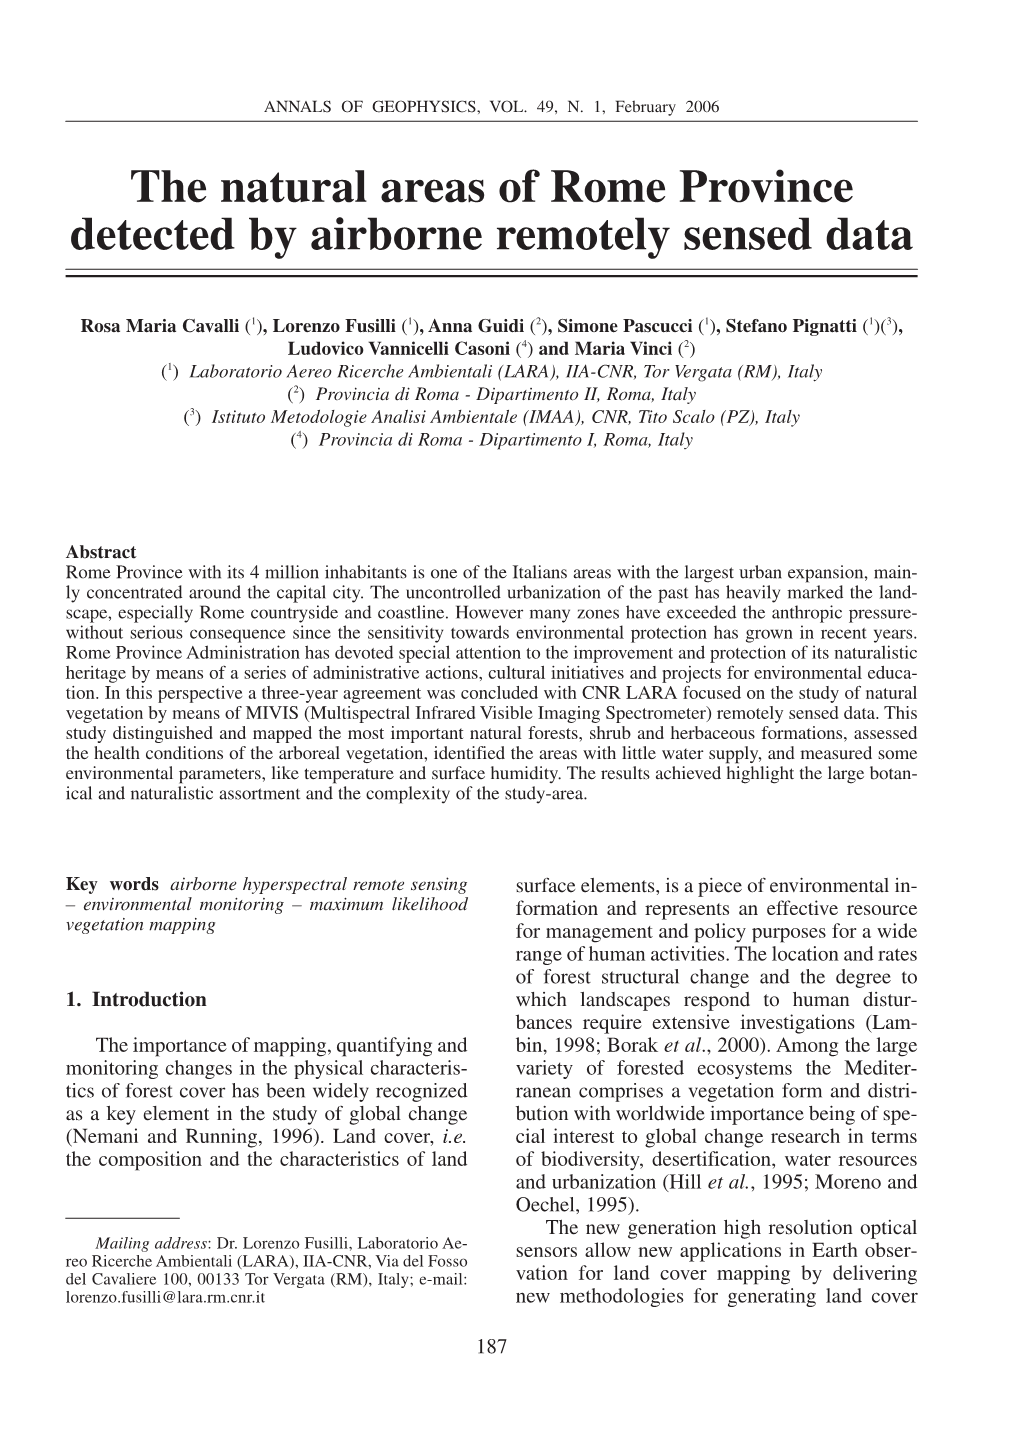 The Natural Areas of Rome Province Detected by Airborne Remotely Sensed Data